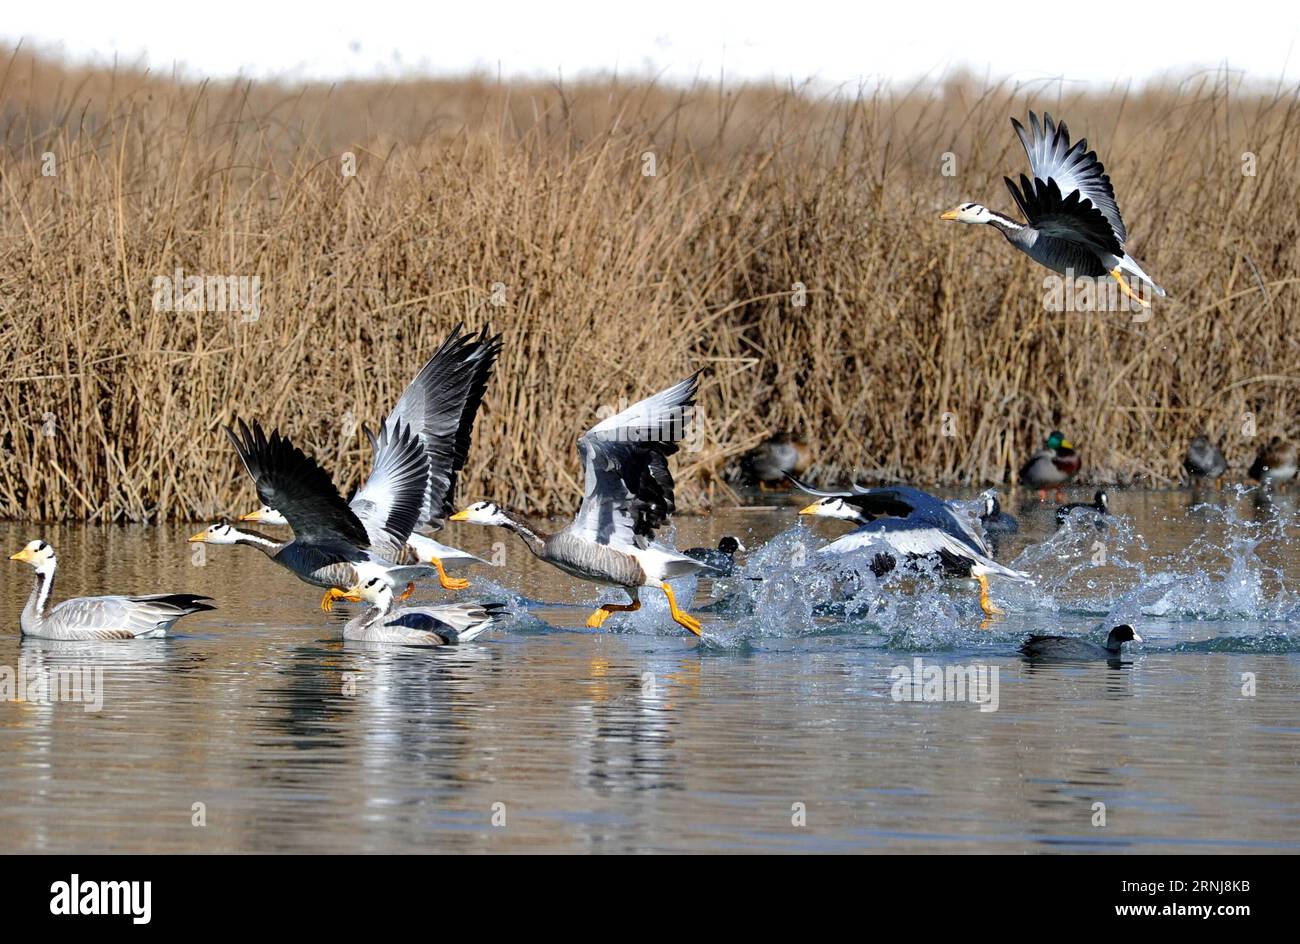 (170108) -- LHASA, Jan. 8, 2017 -- Birds are seen at Lalu wetland in Lhasa, capital of southwest China s Tibet Autonomous Region, Jan. 8, 2017. The Lalu Wetland, known as the Lung of Lhasa , is China s unique urban natural inland wetland with the highest altitude and largest acreage. ) (zkr) CHINA-LHASA-LALU WETLAND-BIRDS(CN) ZhangxRufeng PUBLICATIONxNOTxINxCHN   Lhasa Jan 8 2017 Birds are Lakes AT Lalu Wetland in Lhasa Capital of Southwest China S Tibet Autonomous Region Jan 8 2017 The Lalu Wetland known As The Lung of Lhasa IS China S Unique Urban Natural Domestically Wetland With The Highes Stock Photo